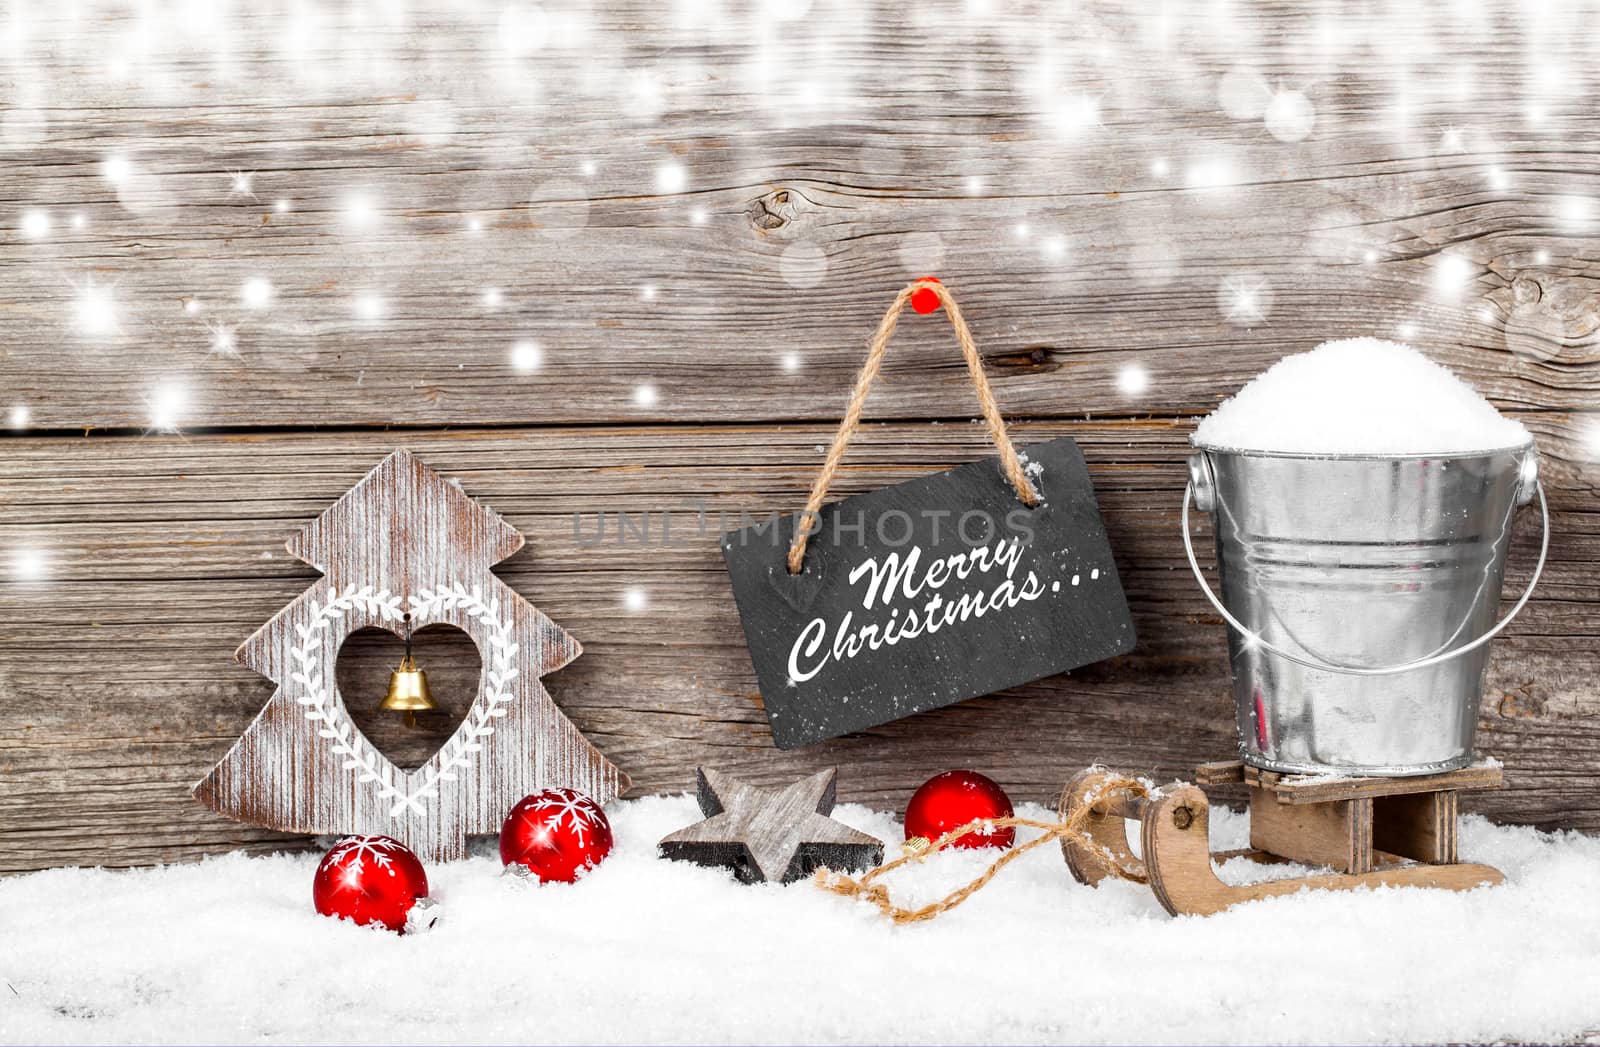 Snow in a bucket on a sled, on wooden background, with Christmas decoration